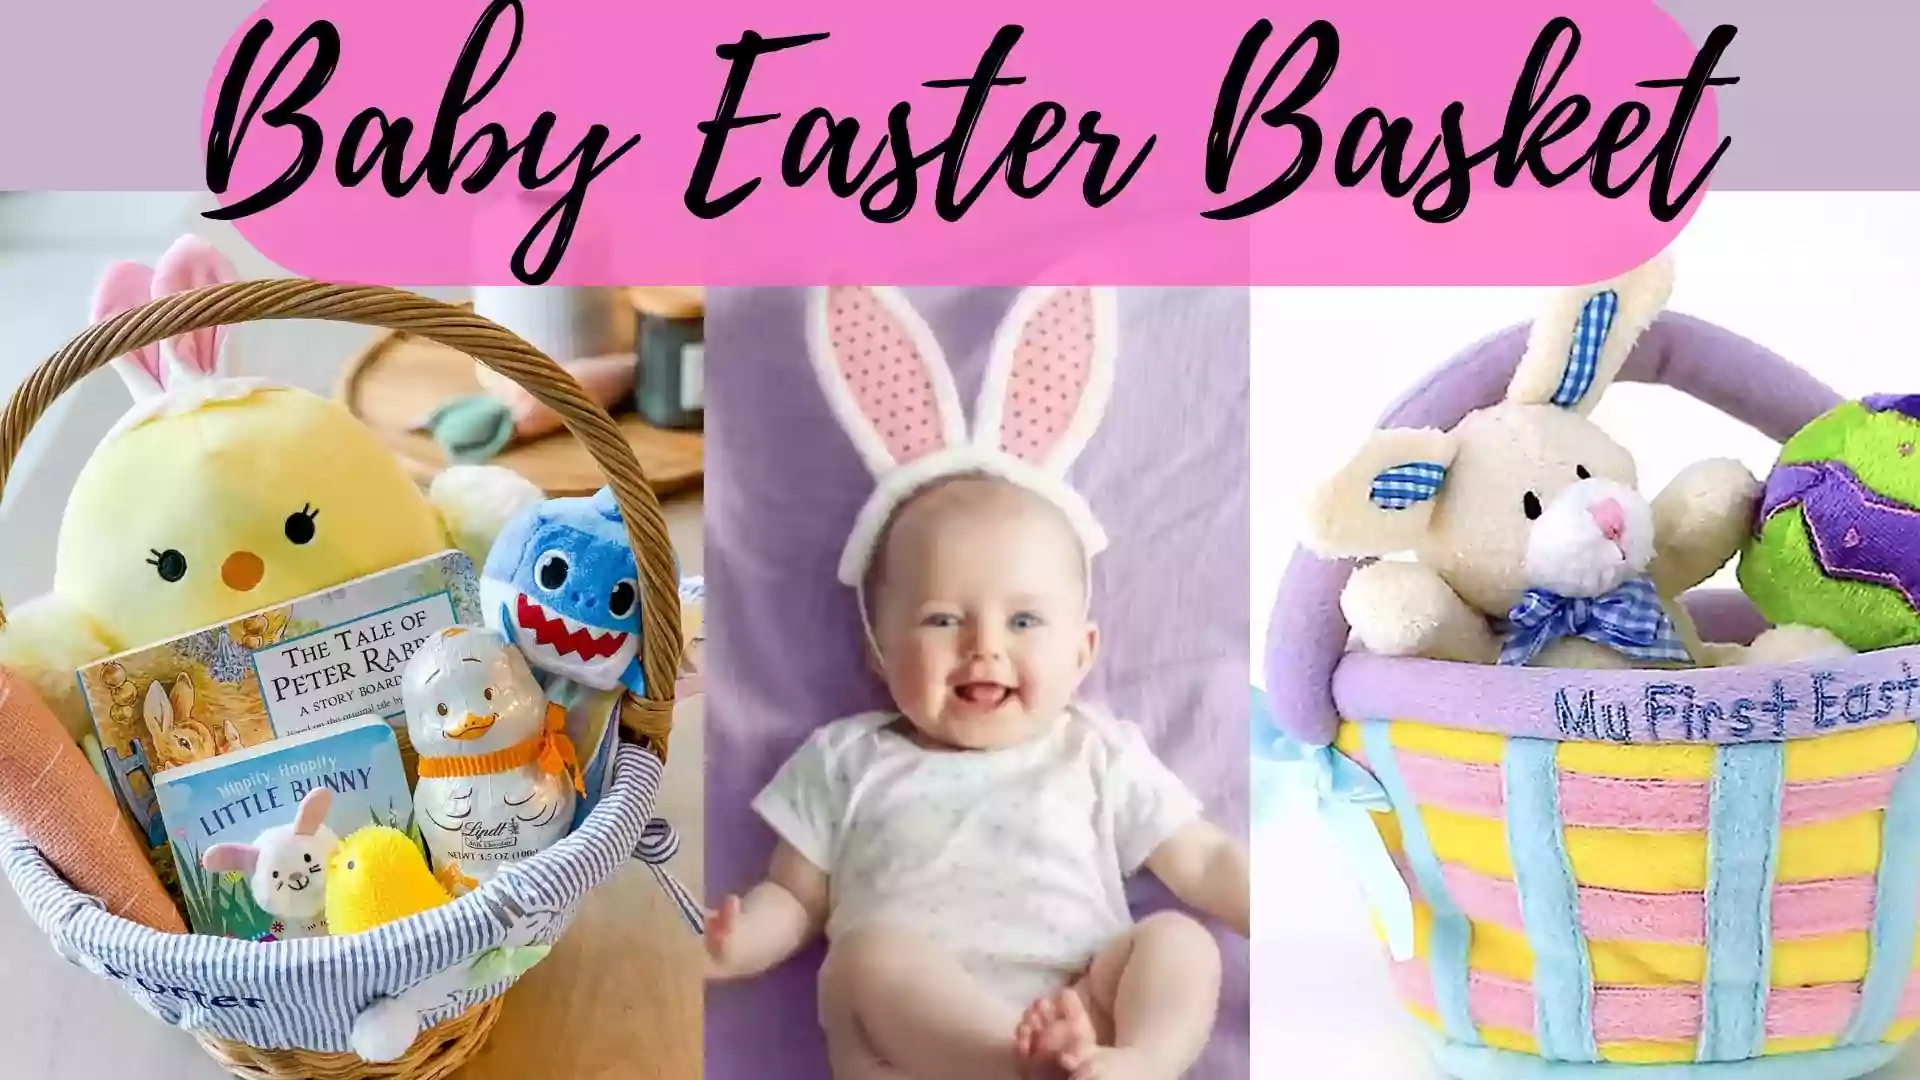 Baby Easter Basket wallpaper and images | Easter 2022